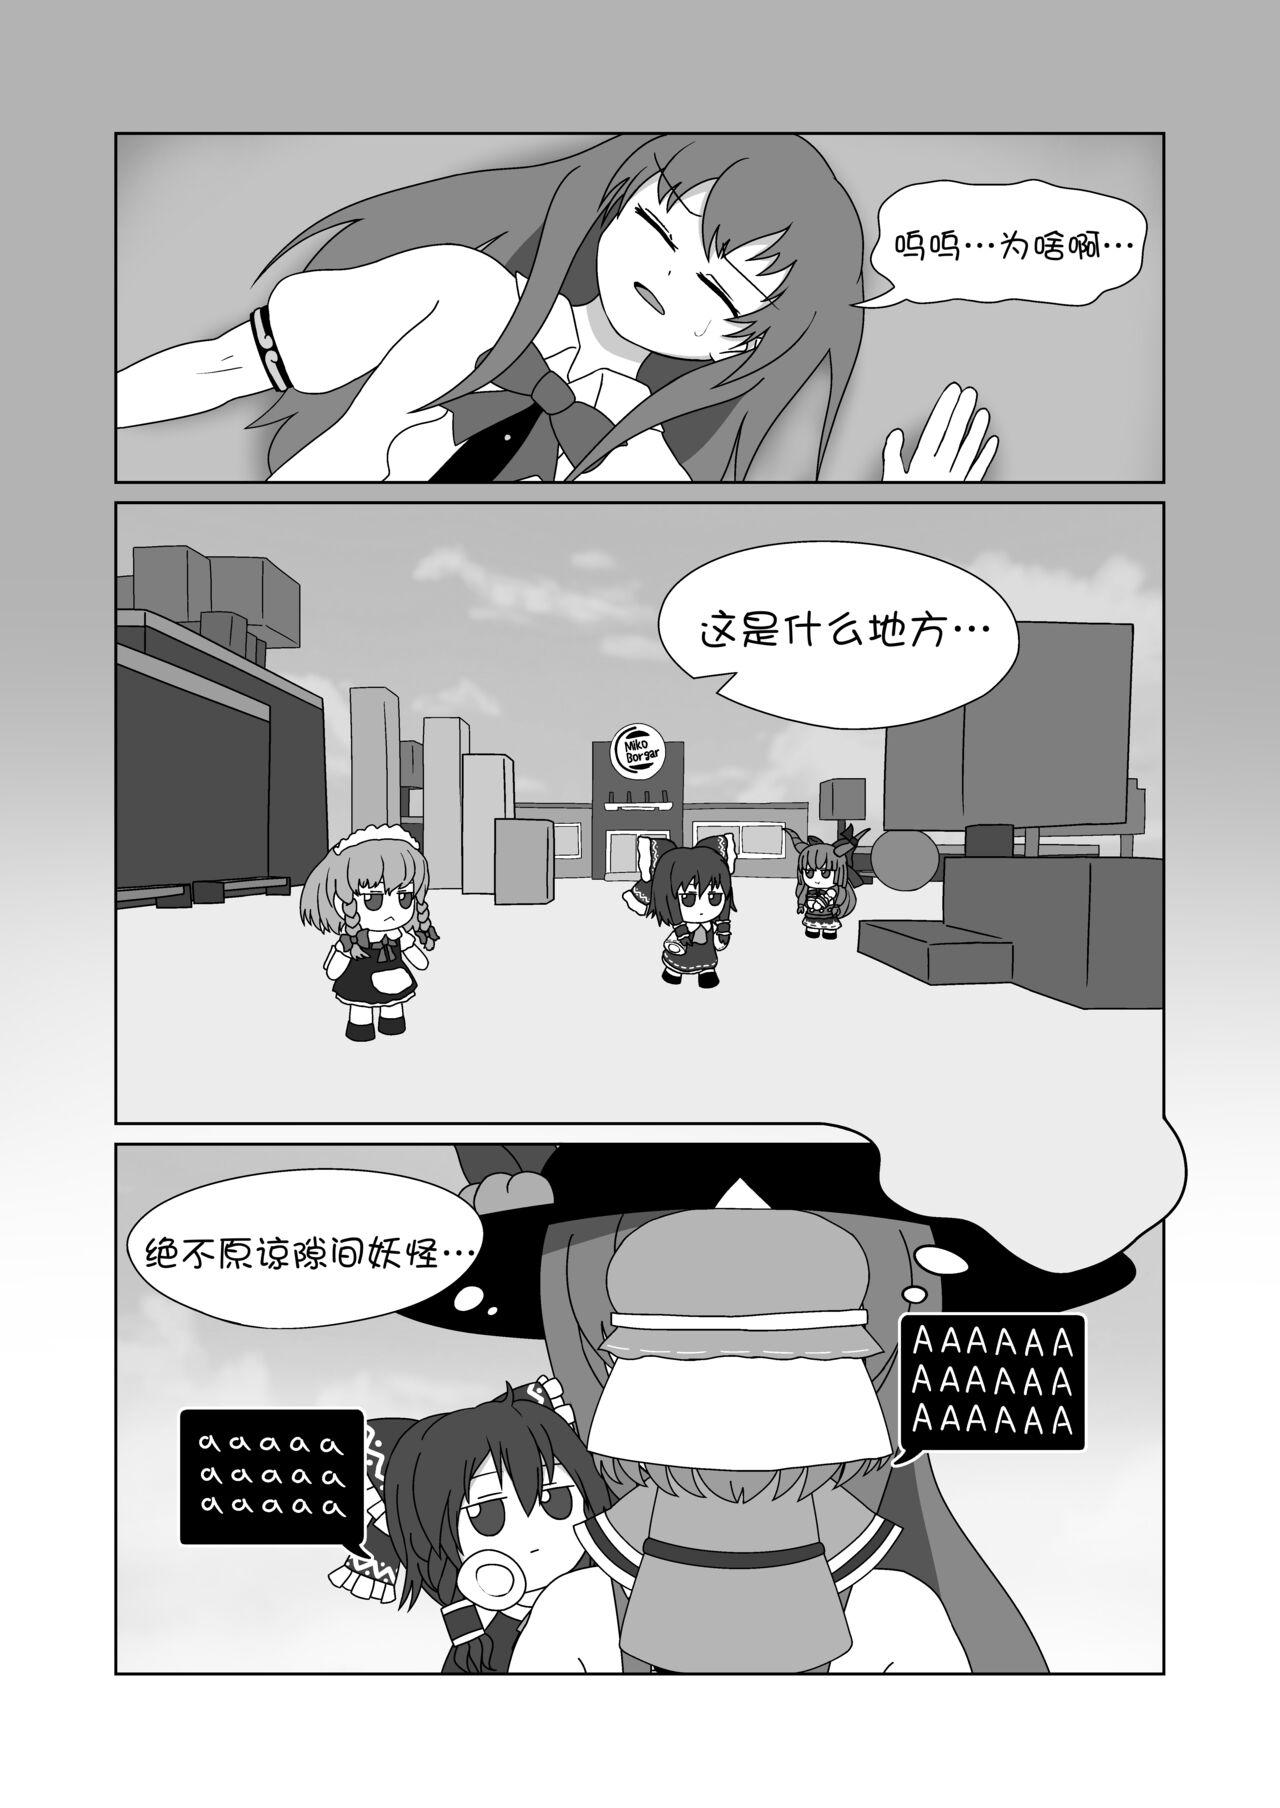 Humiliation Pov 天子 in BecomeFumo - Touhou project Rimjob - Page 5